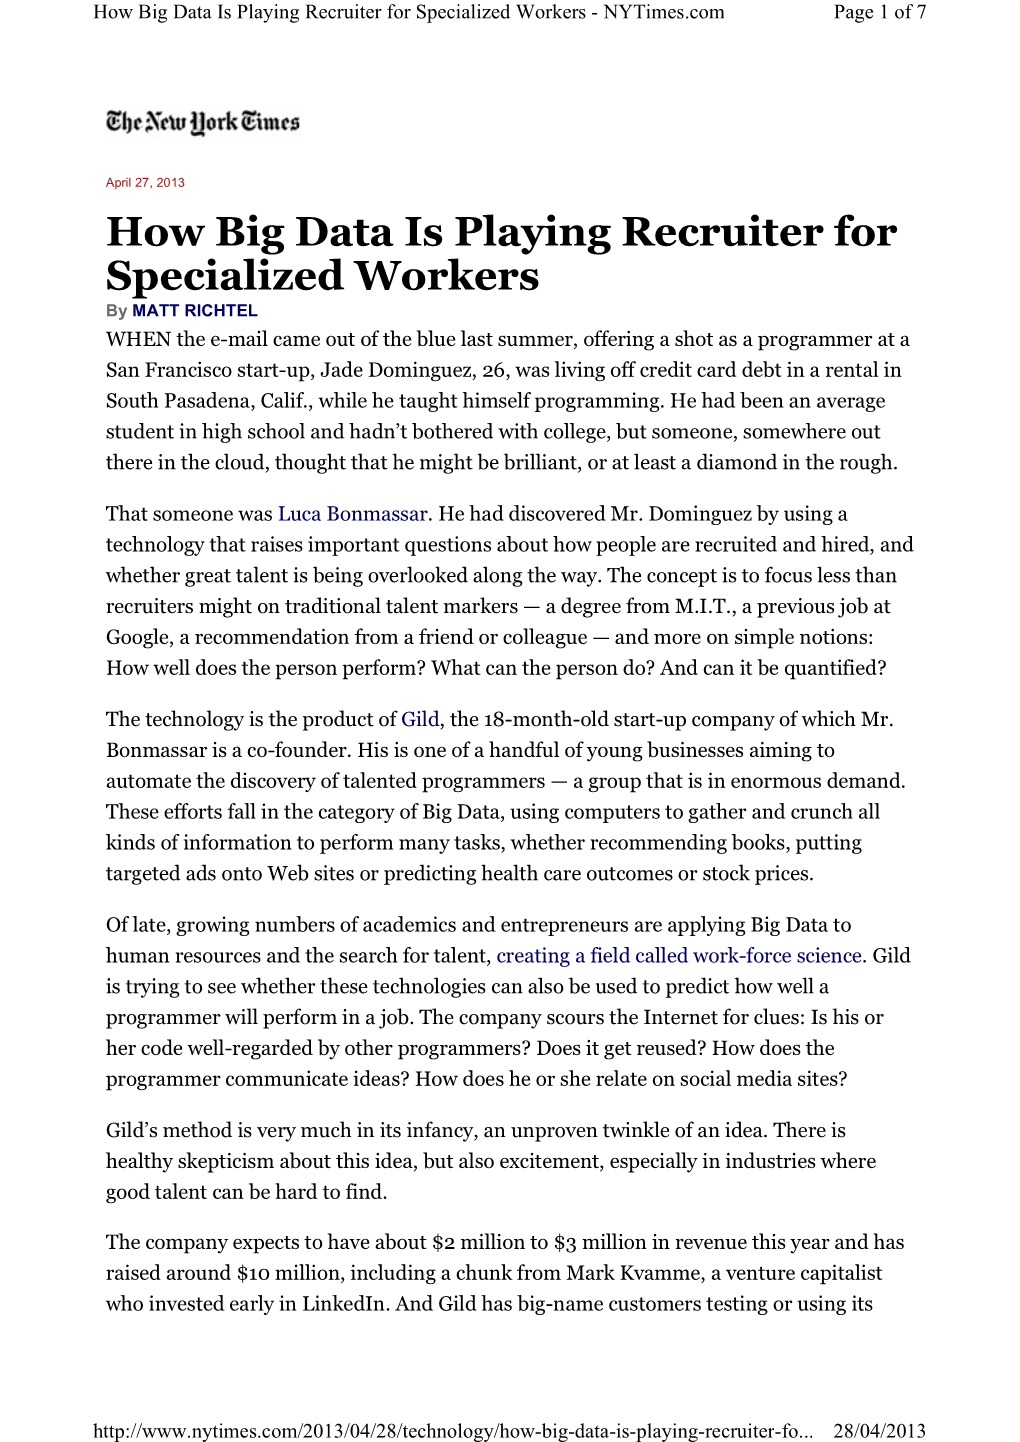 How Big Data Is Playing Recruiter for Specialized Workers - Nytimes.Com Page 1 of 7